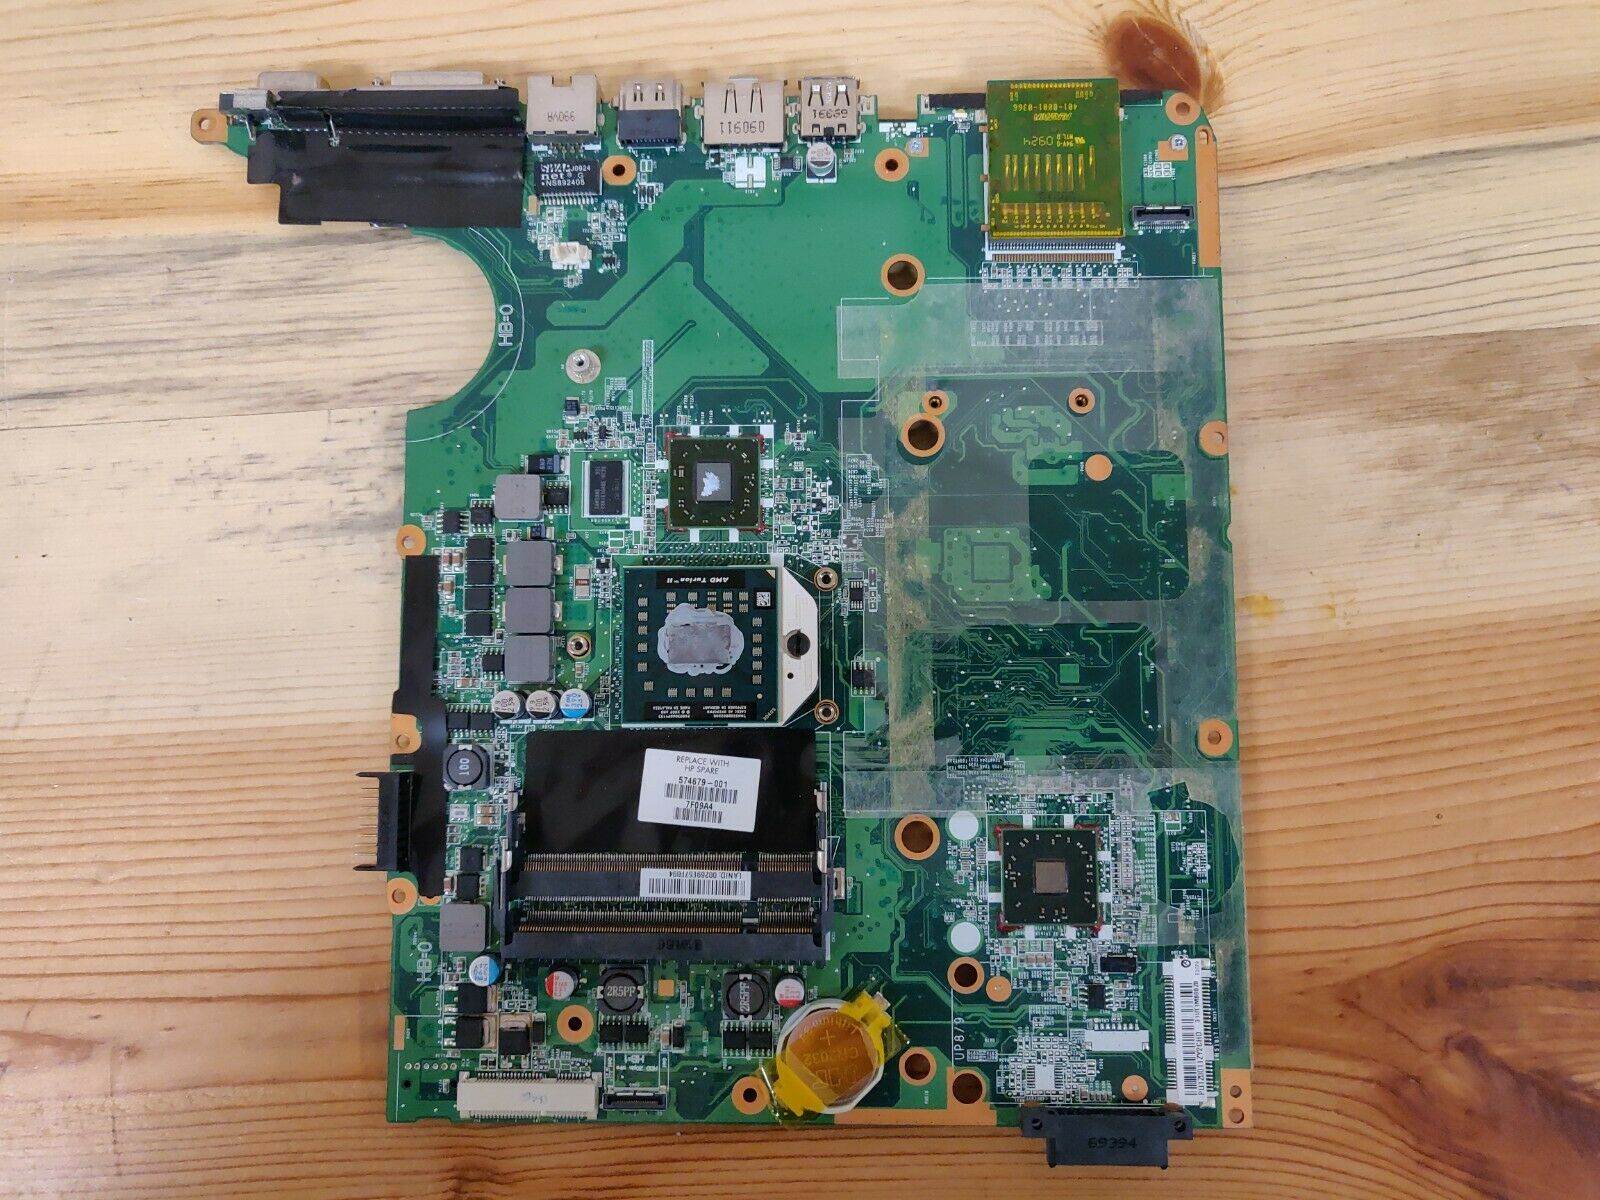 HP Pavilion DV7 Motherboard AMD Turion II 574679-001 Brand: HP Compatible CPU Brand: AMD UPC: Does not app